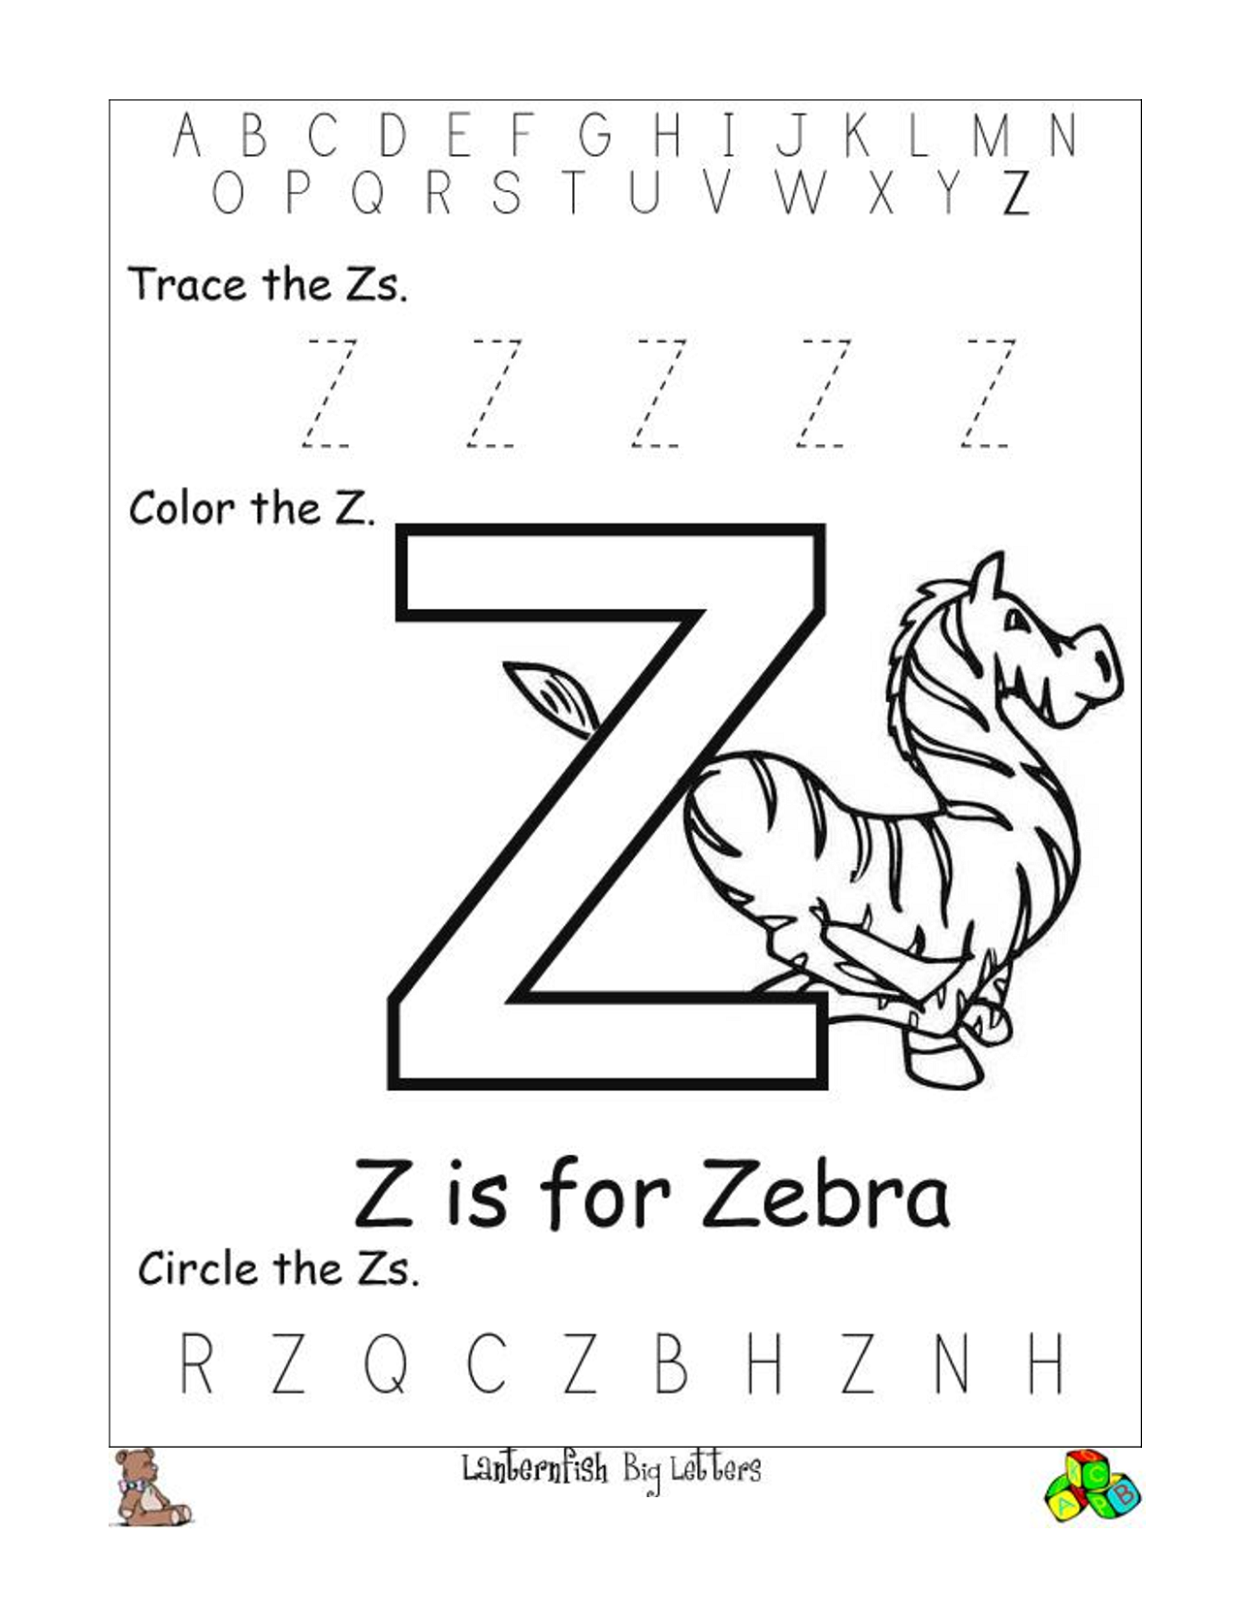 free-printable-tracing-letter-a-to-z-worksheets-pdf-onvacationswall